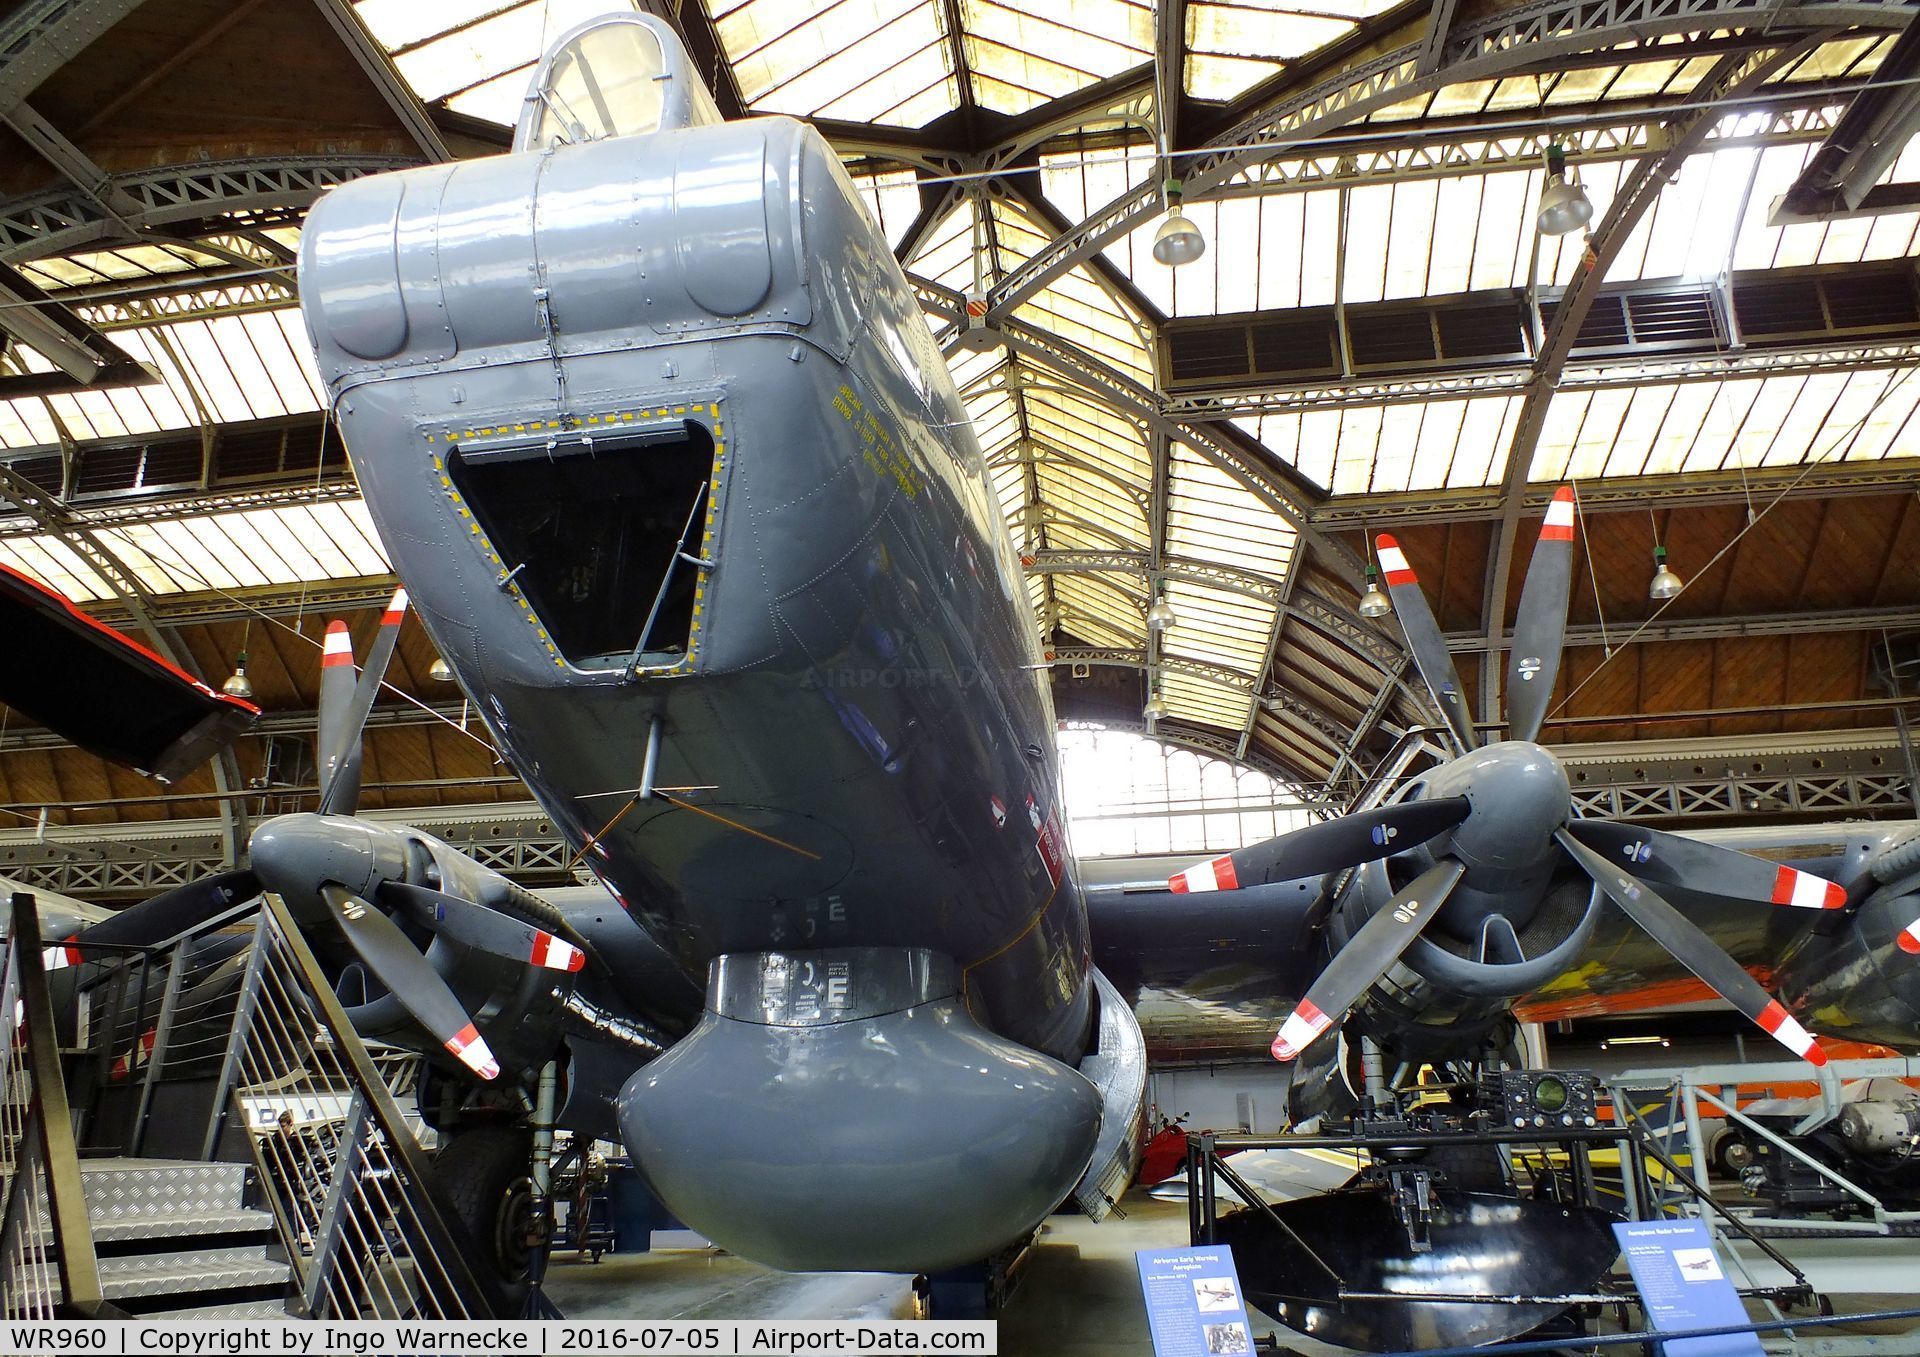 WR960, 1954 Avro 716 Shackleton AEW.2 C/N Not found WR960, Avro 716 Shackleton AEW2 at the Museum of Science and Industry, Manchester